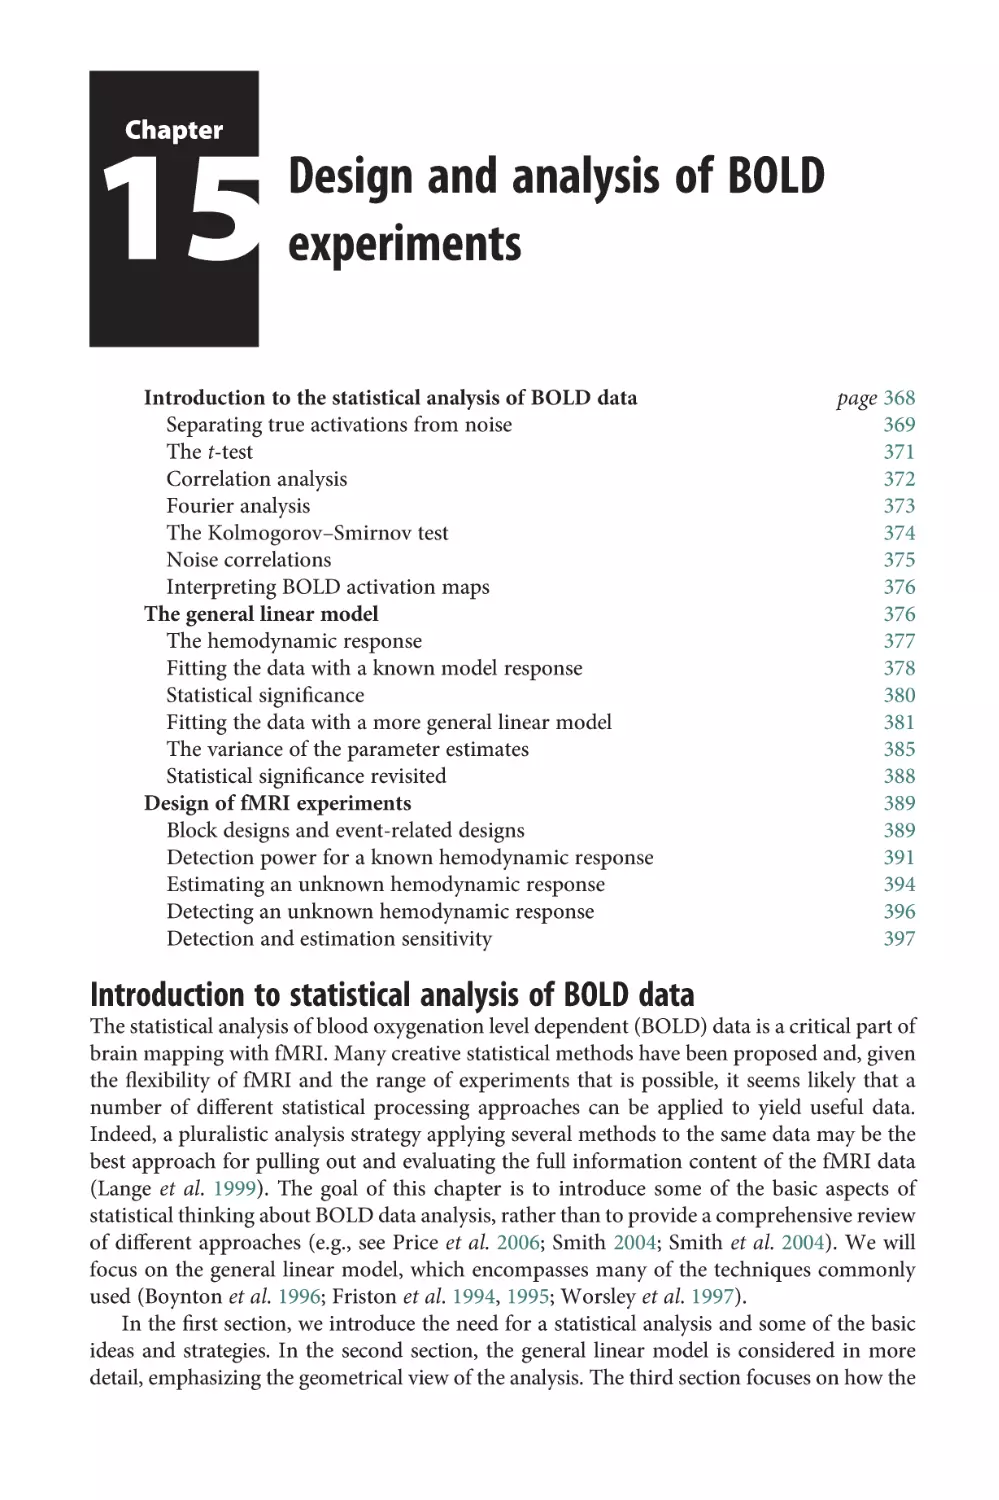 Chapter 15 Design and analysis of BOLD experiments
Introduction to statistical analysis of BOLD data